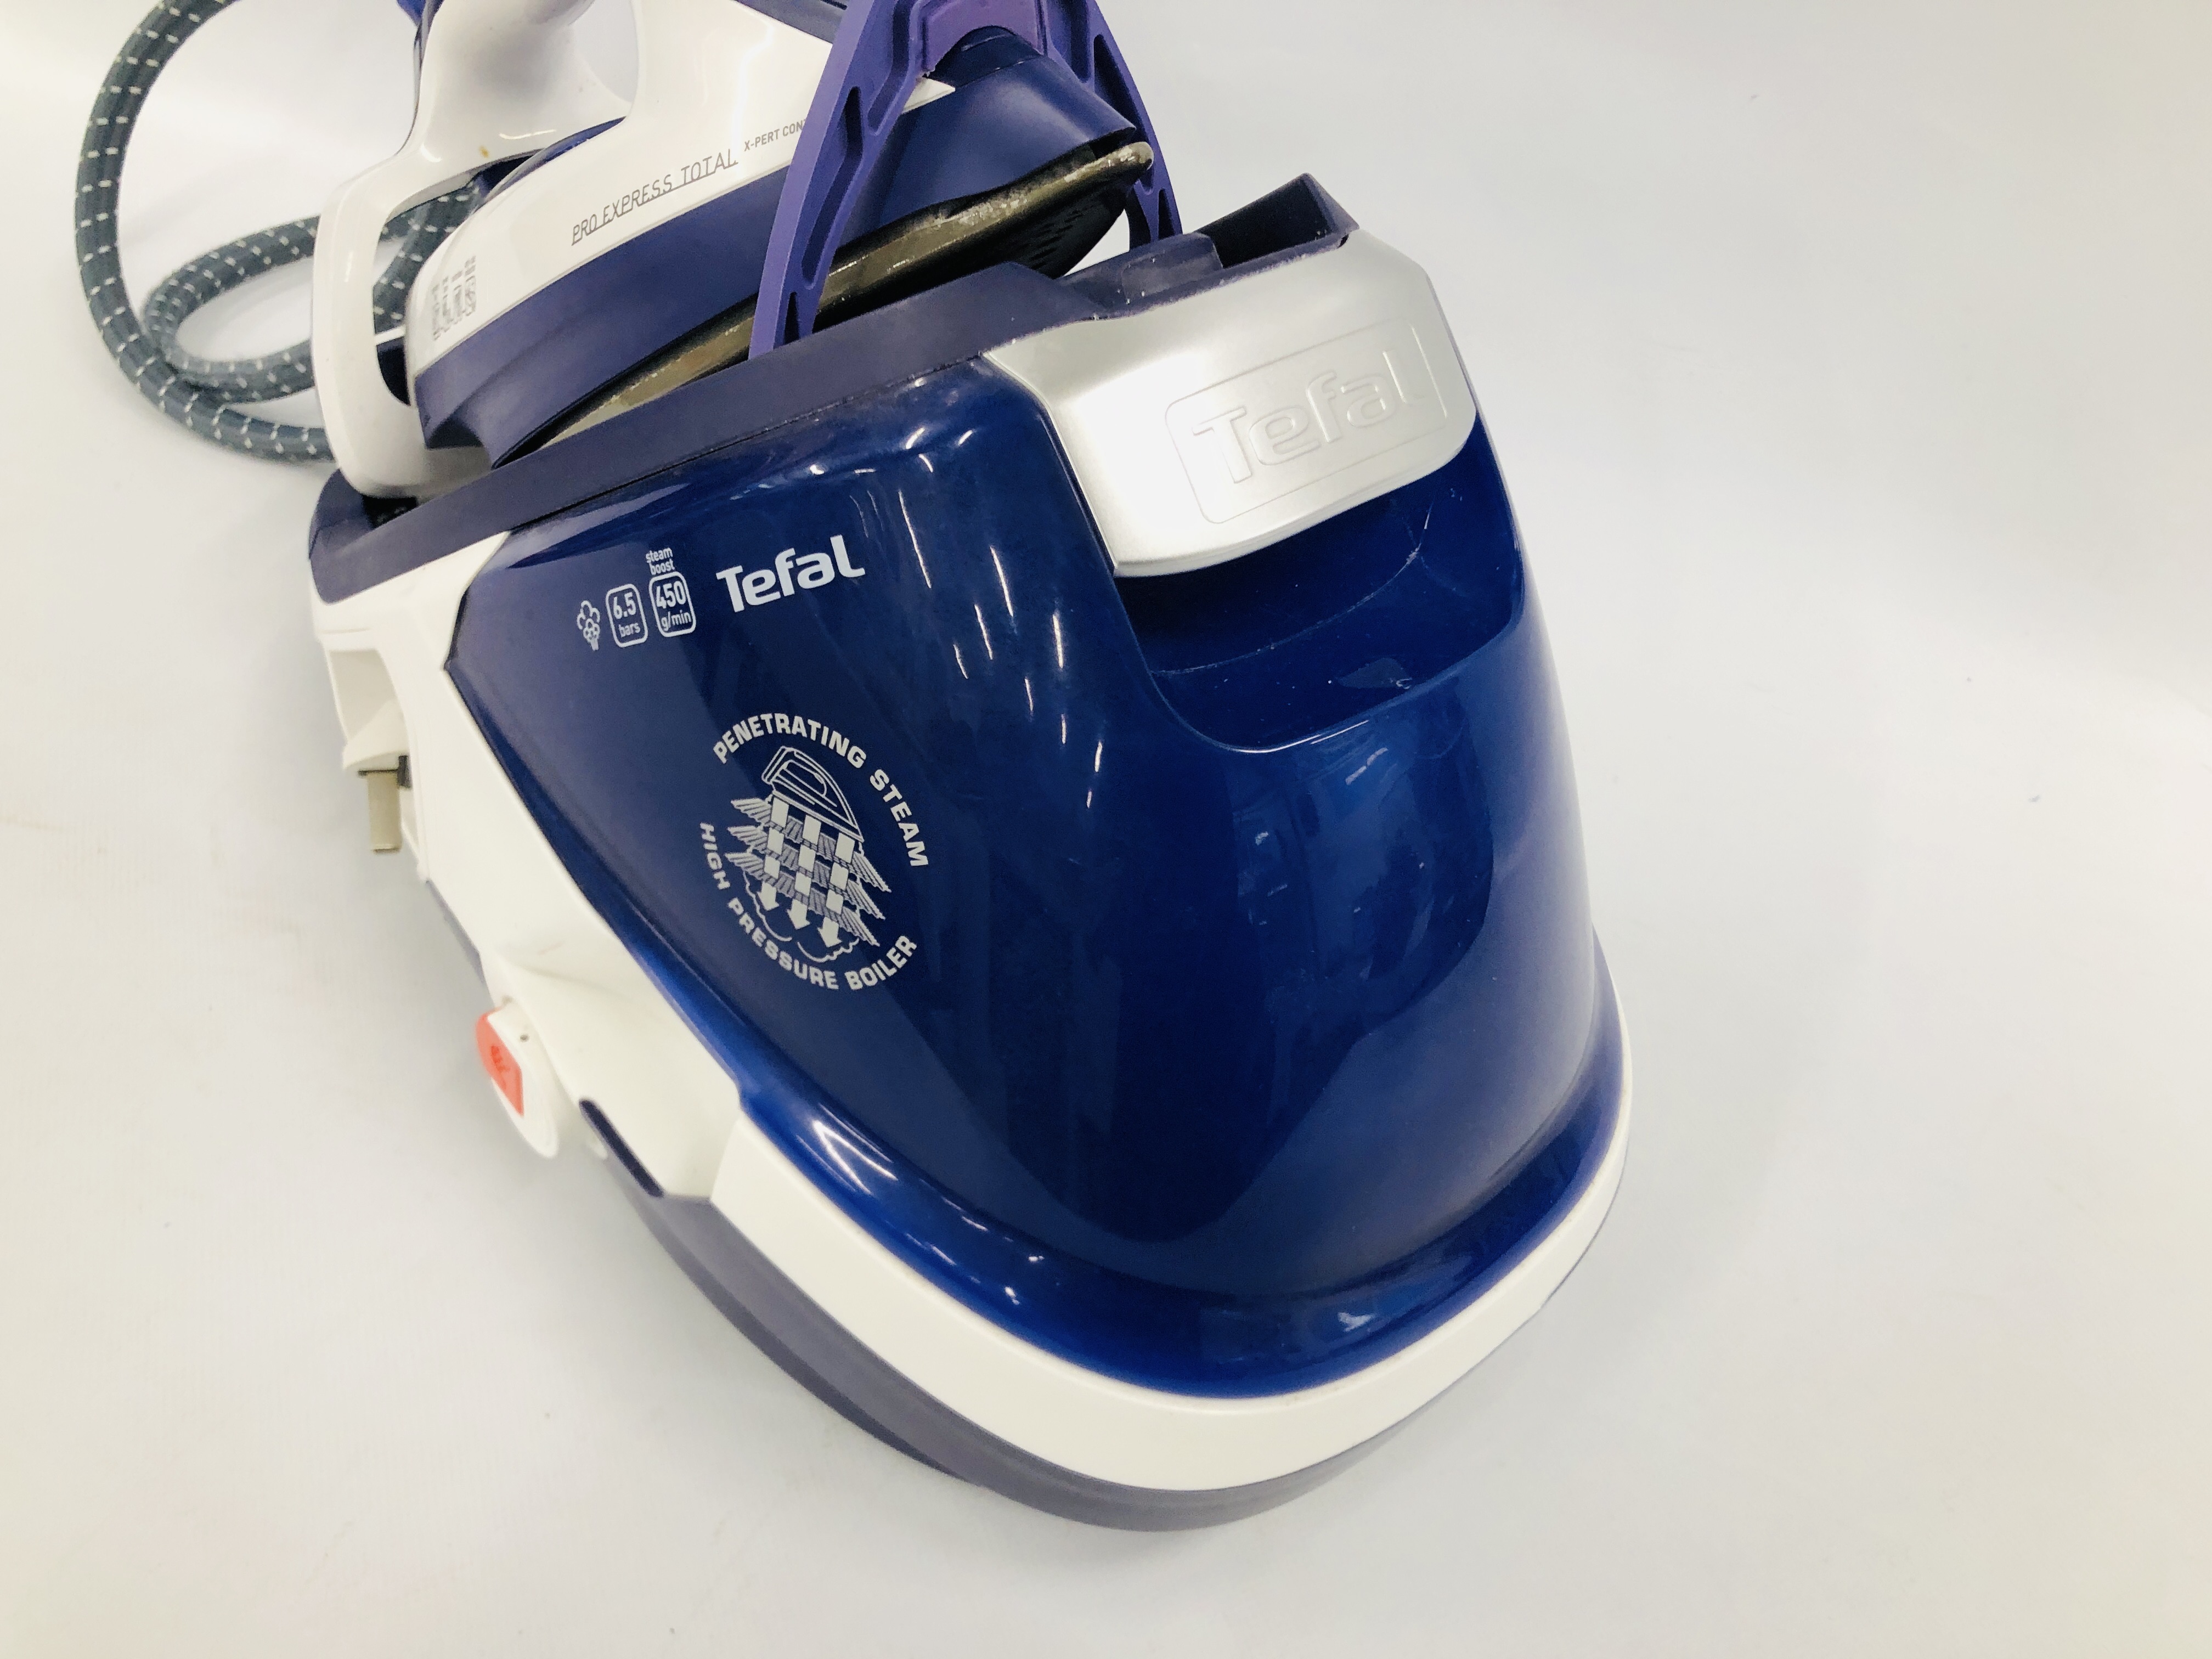 TEFAL PRO EXPRESS TOTAL X-PERT CONTROL STEAM IRON - SOLD AS SEEN. - Image 2 of 5